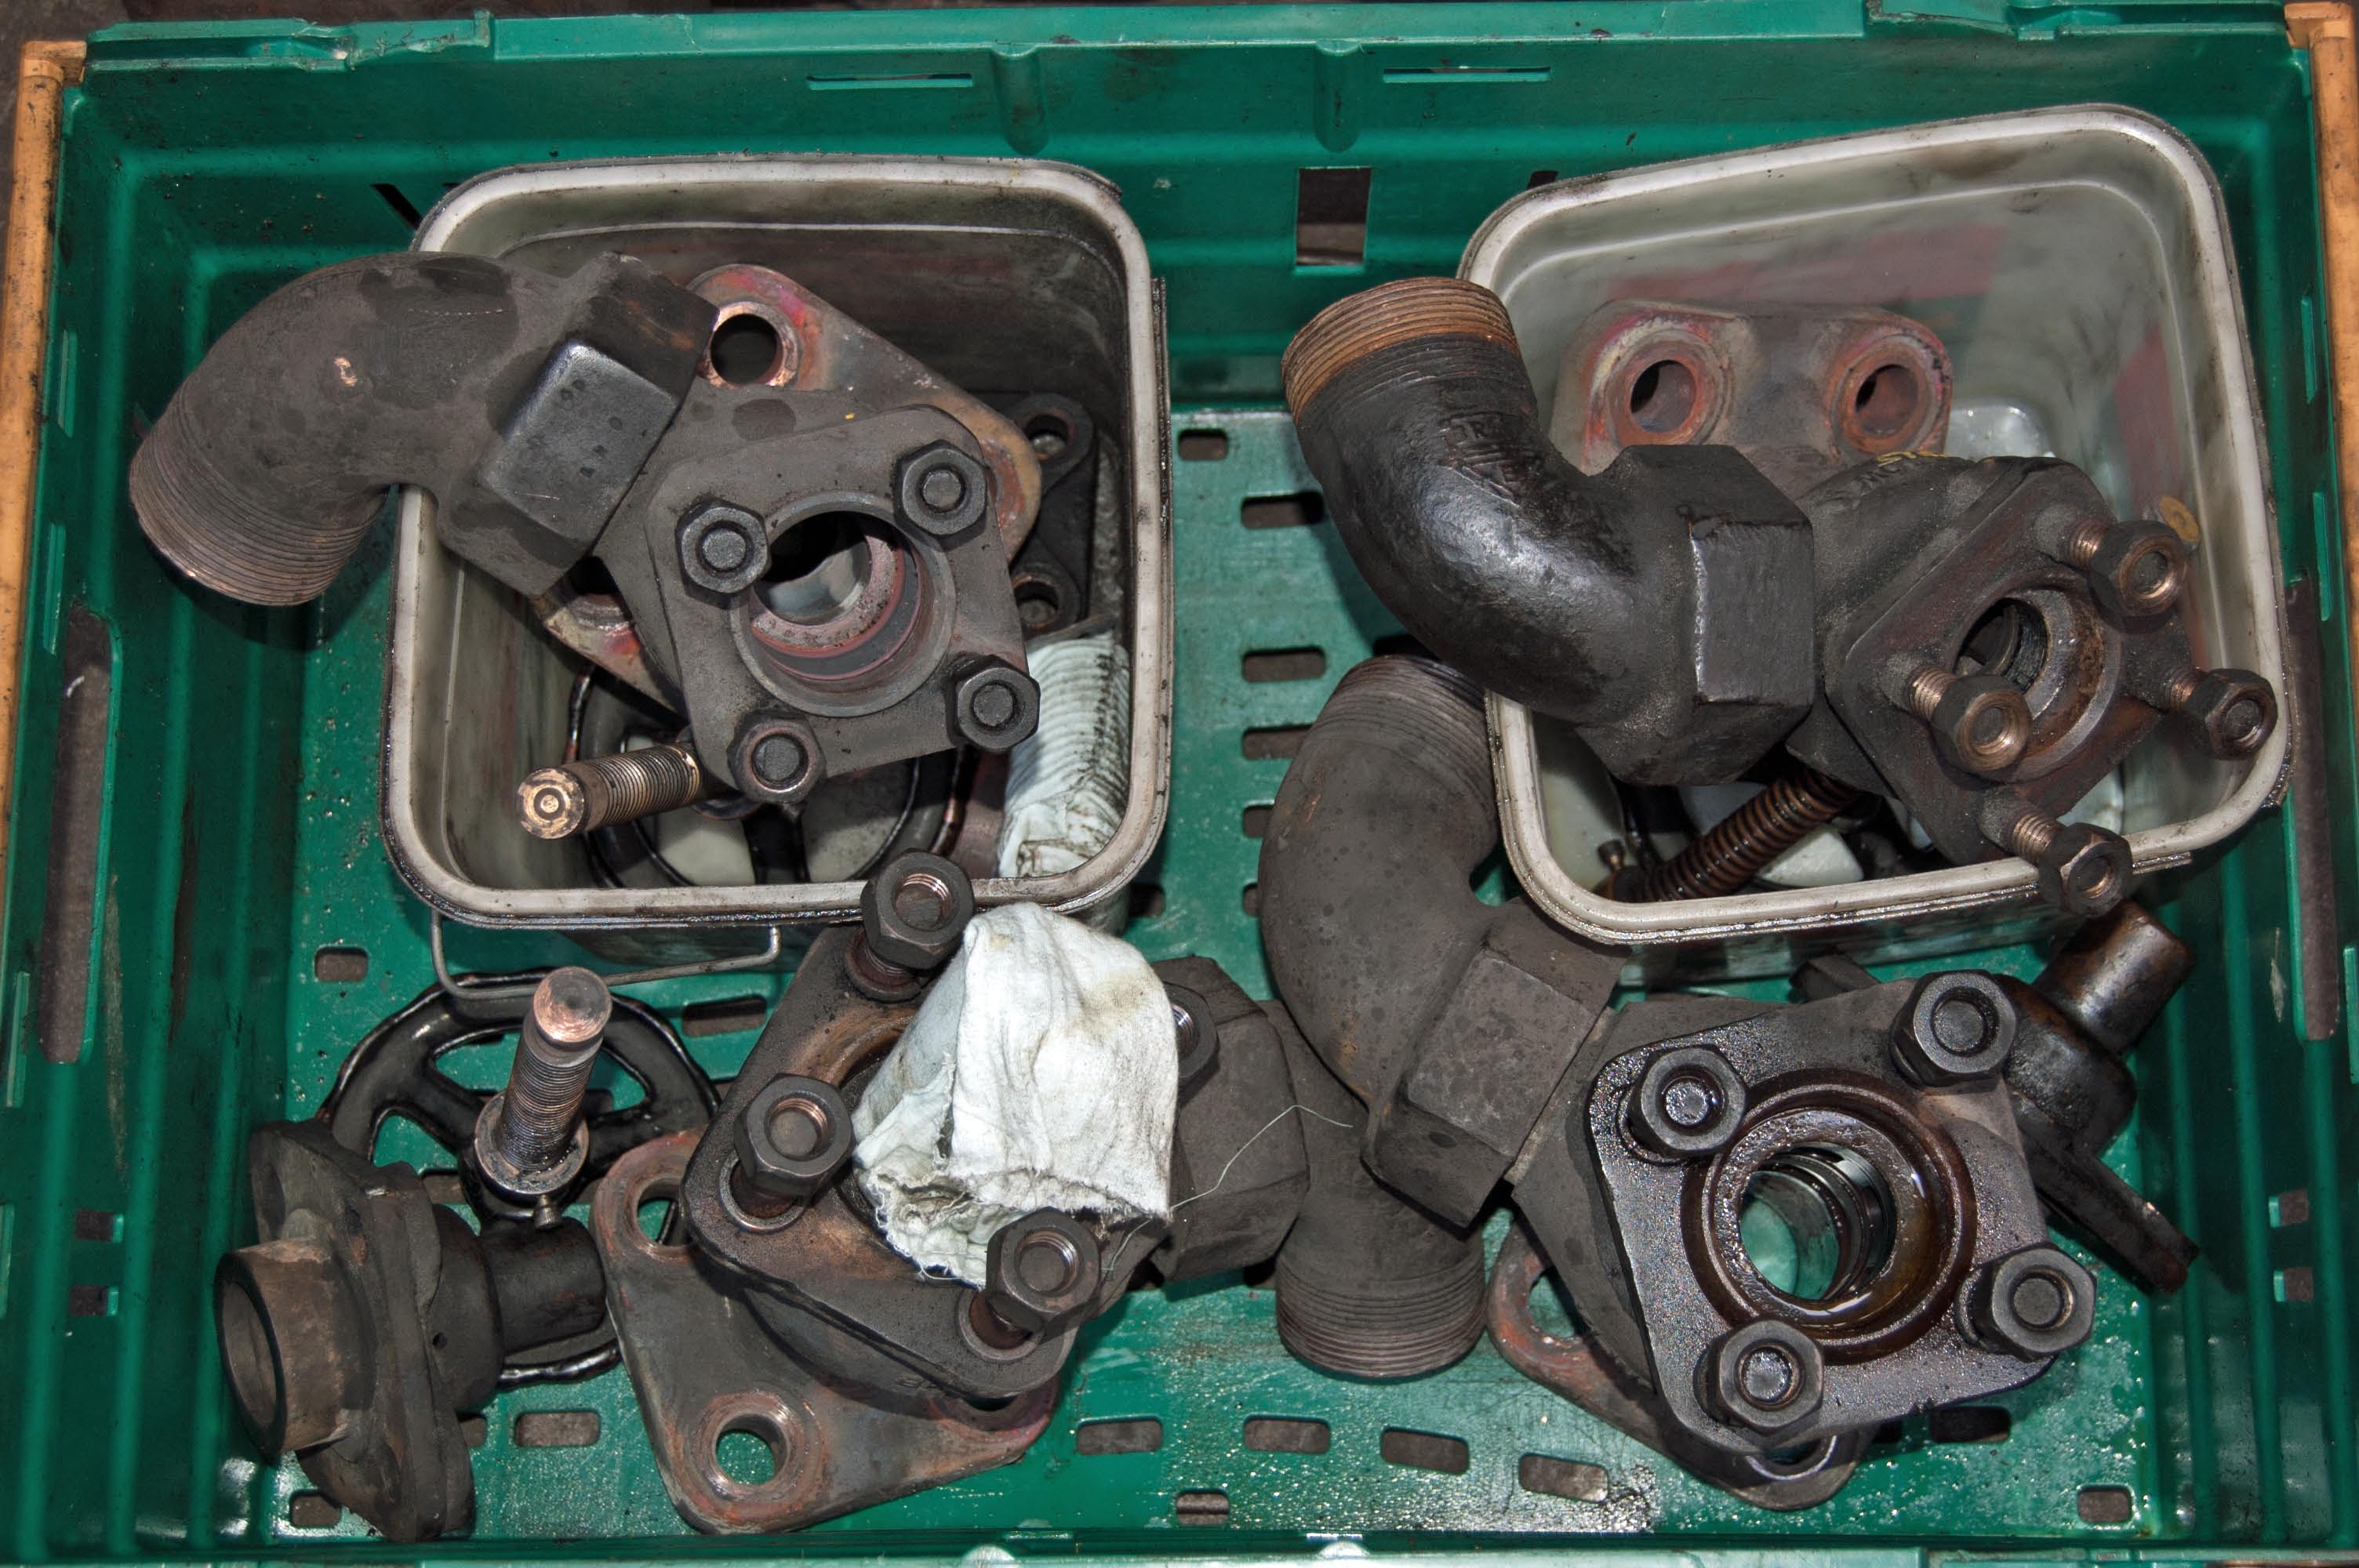 The dismantled housings from the four Klinger valves, which are fitted to the manifold